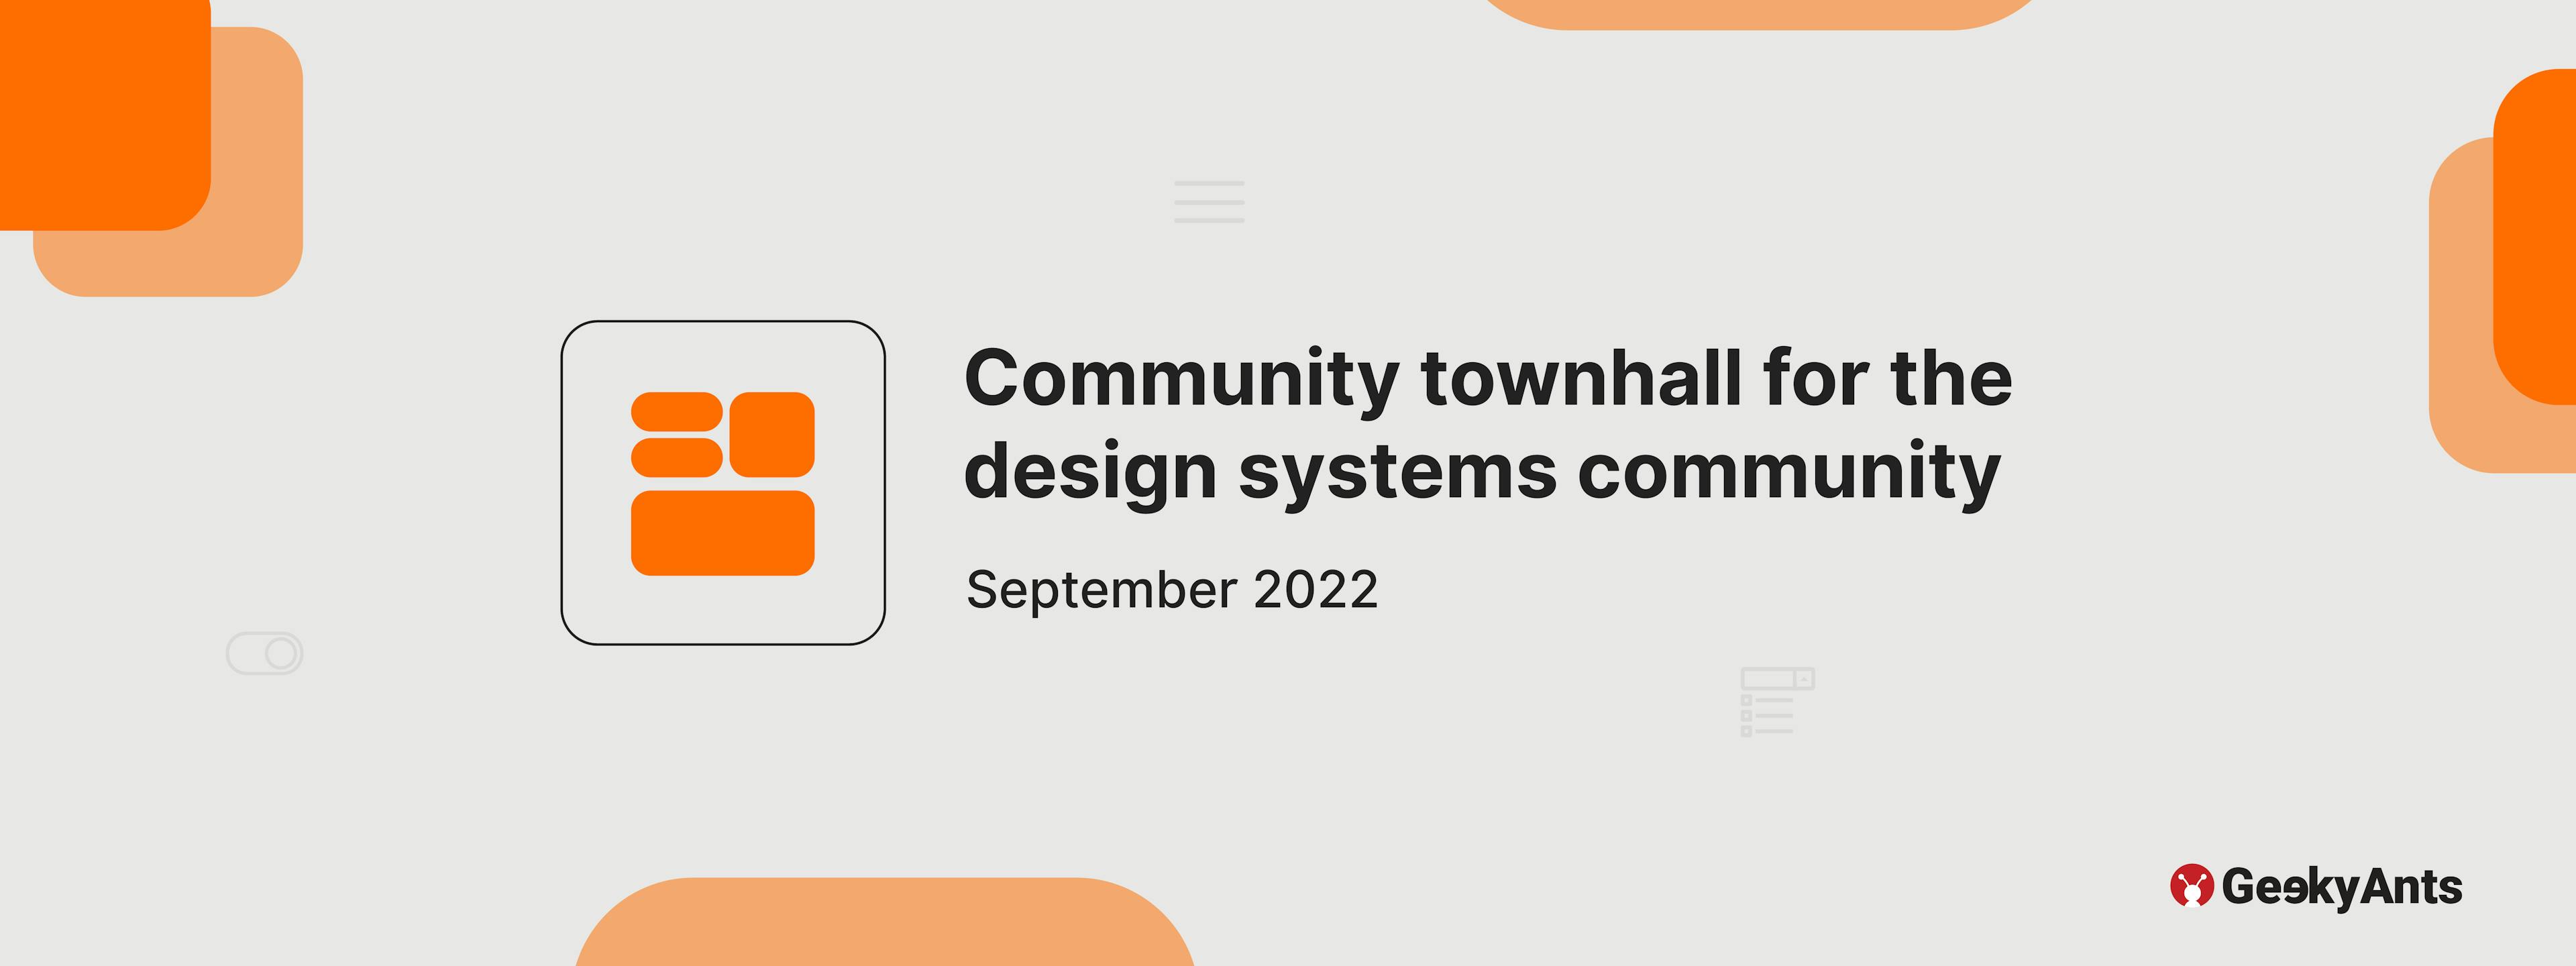 Community Townhall for the Design Systems Community